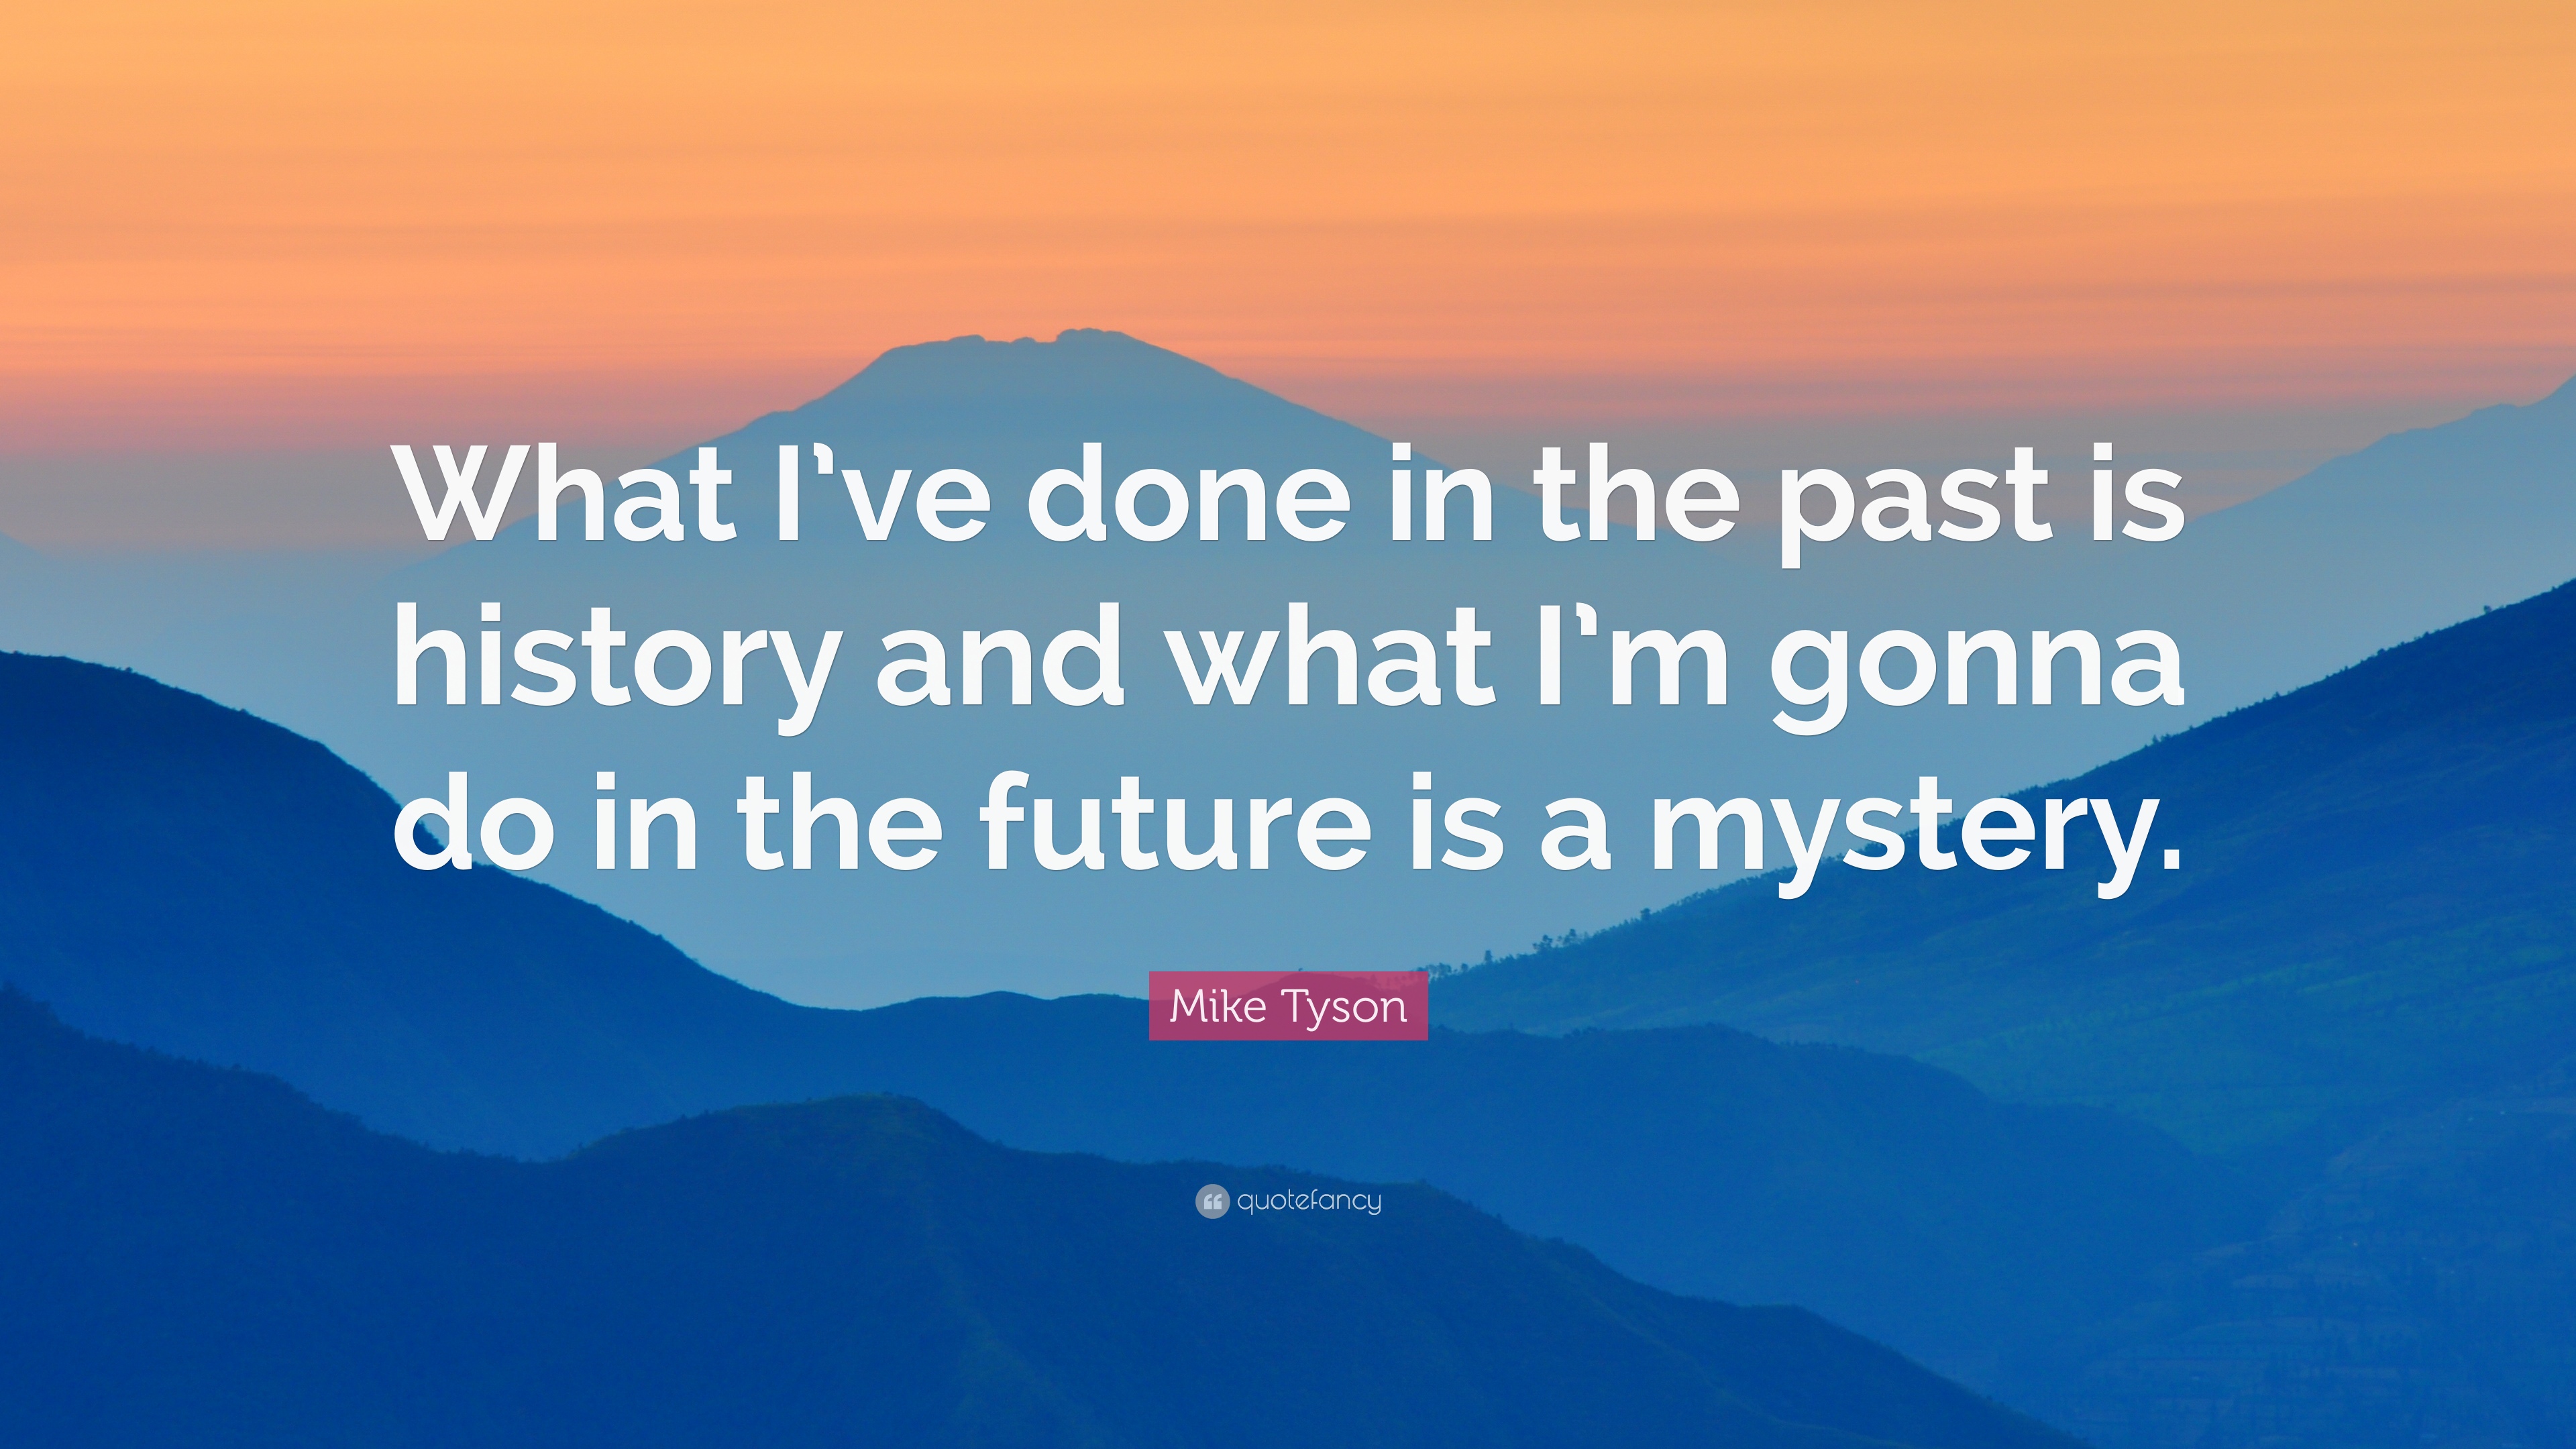 Mike Tyson Quote: “What I've done in the past is history and what I